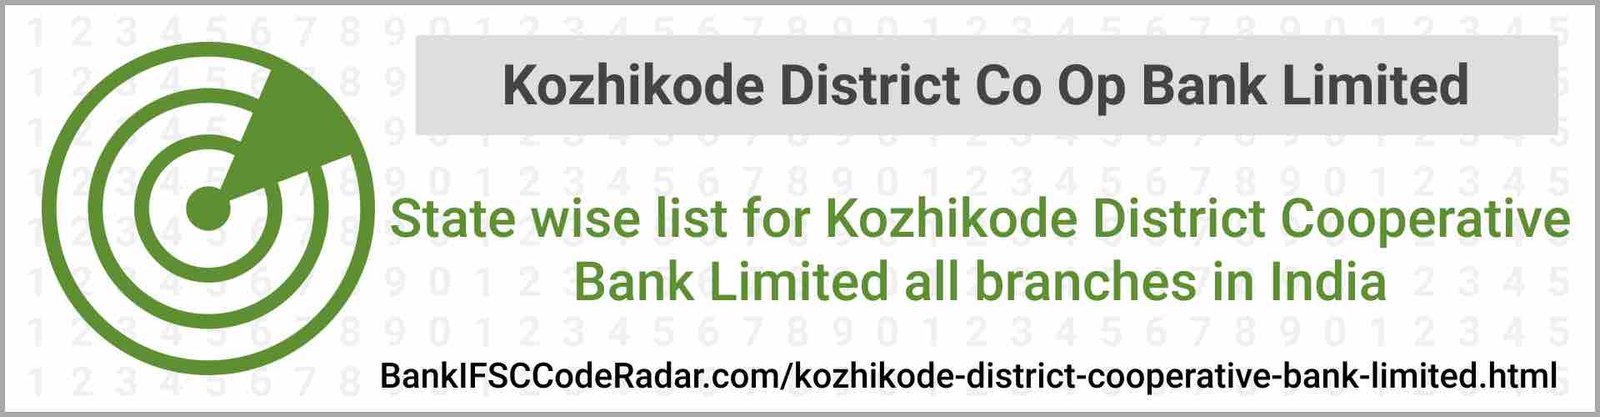 Kozhikode District Cooperative Bank Limited All Branches India